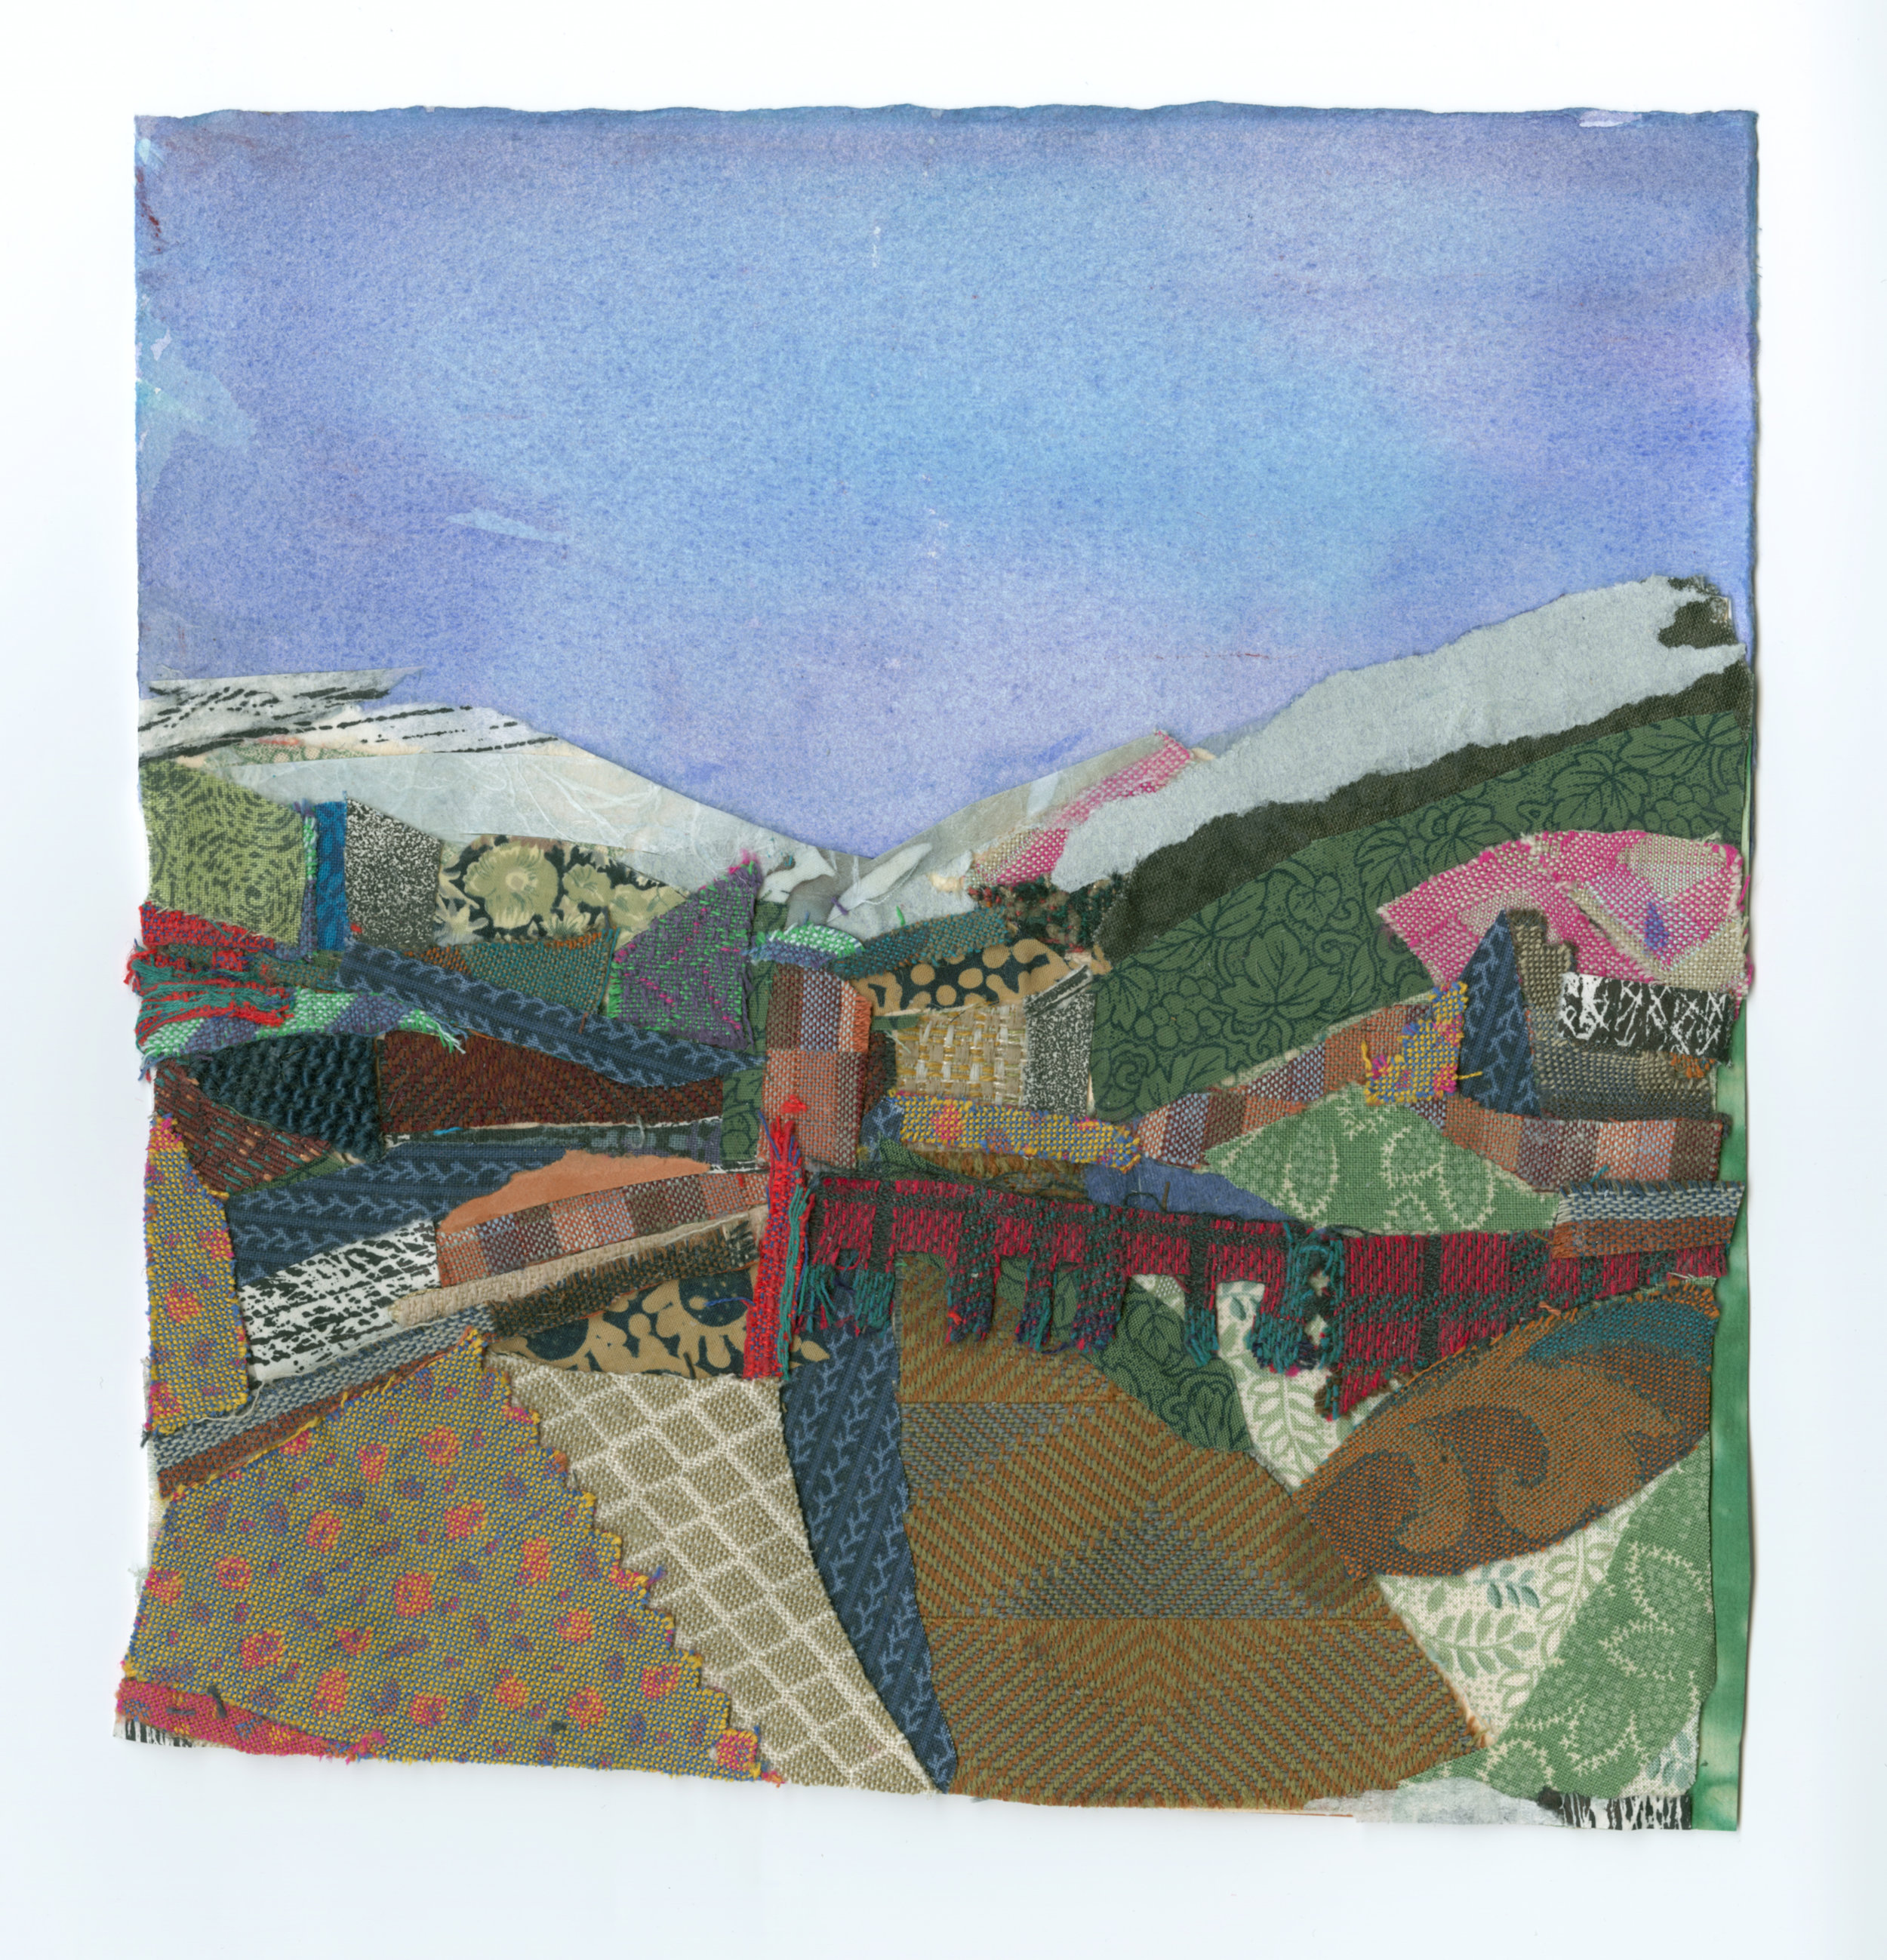   Mountain Fold–Home , 2006, mixed media on paper, 15.375 x 15.25 x 1.5 inches 